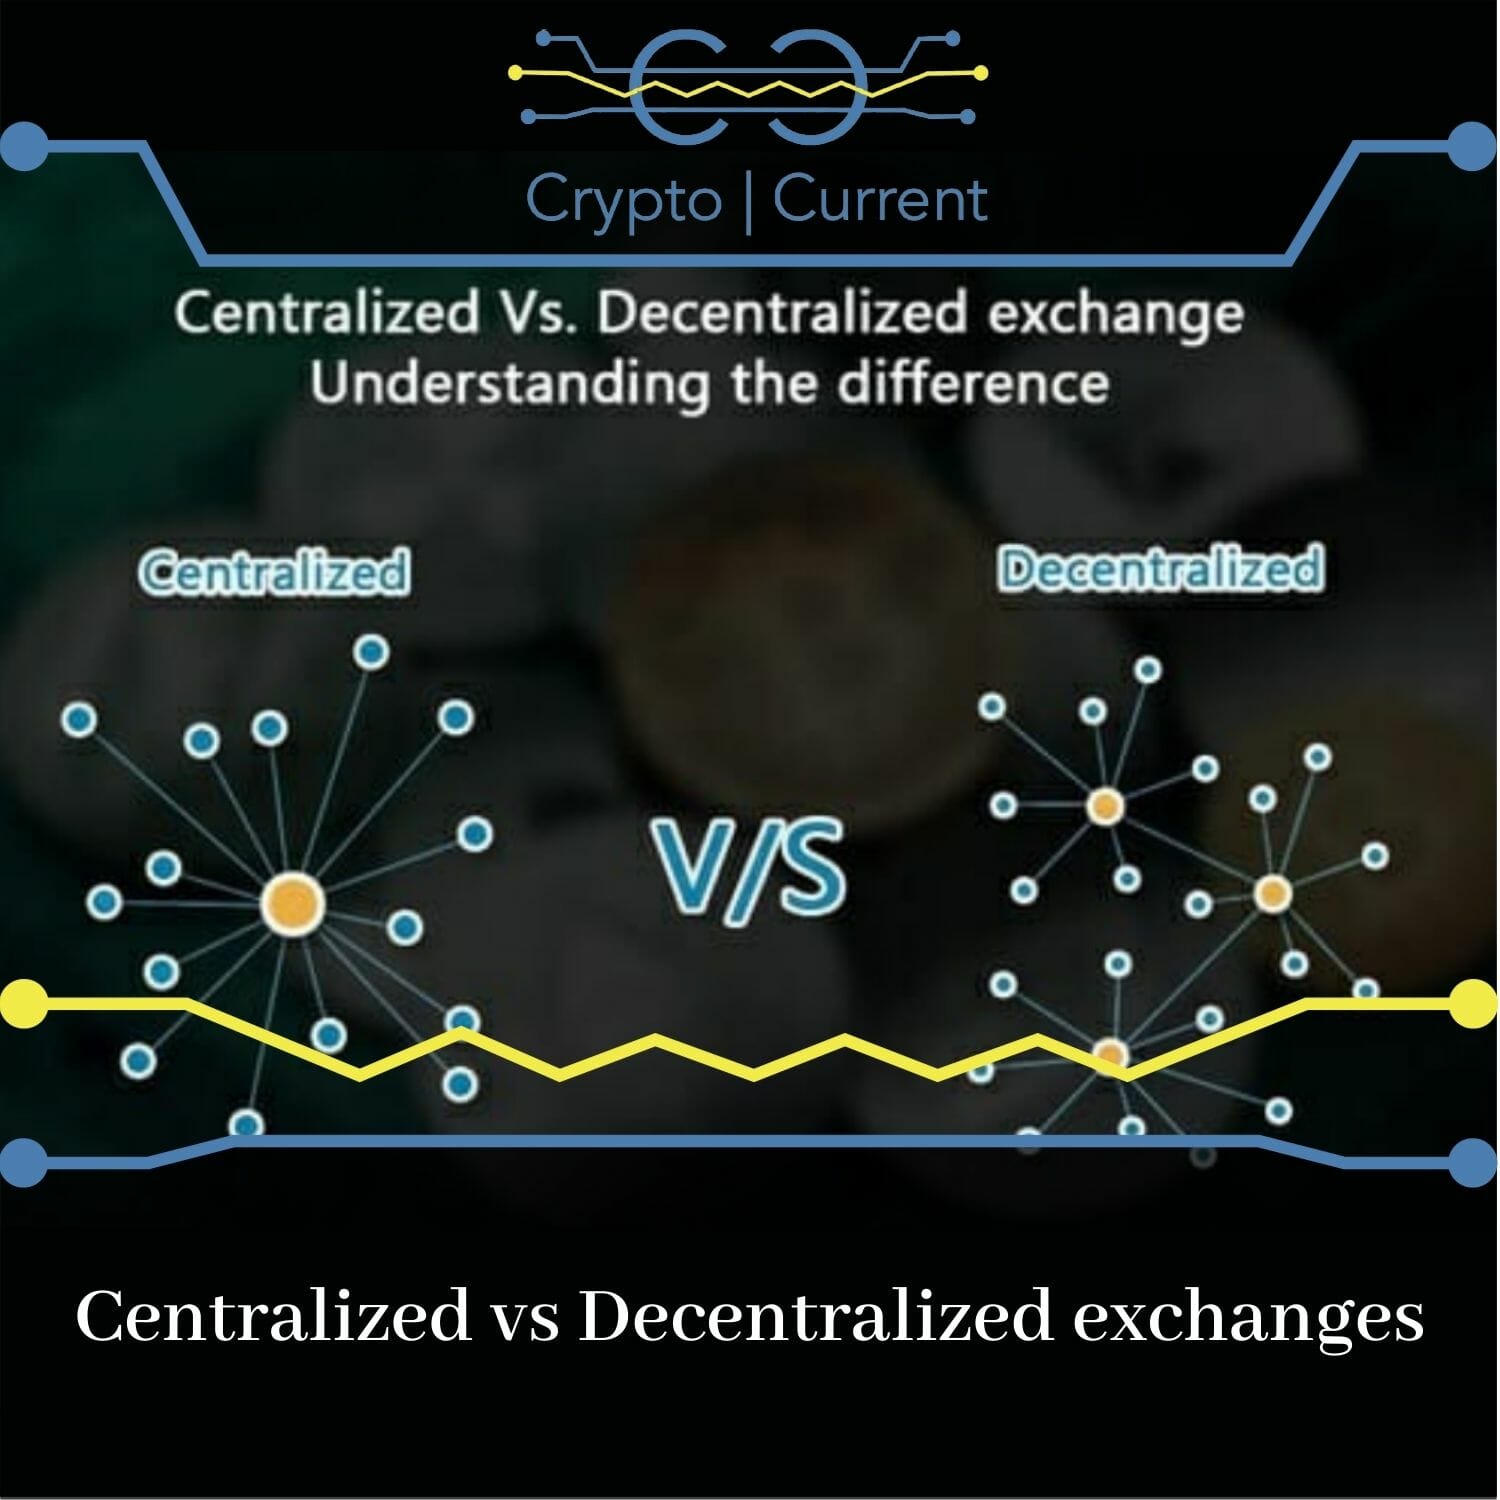 Centralized vs Decentralized exchanges - Crypto Current